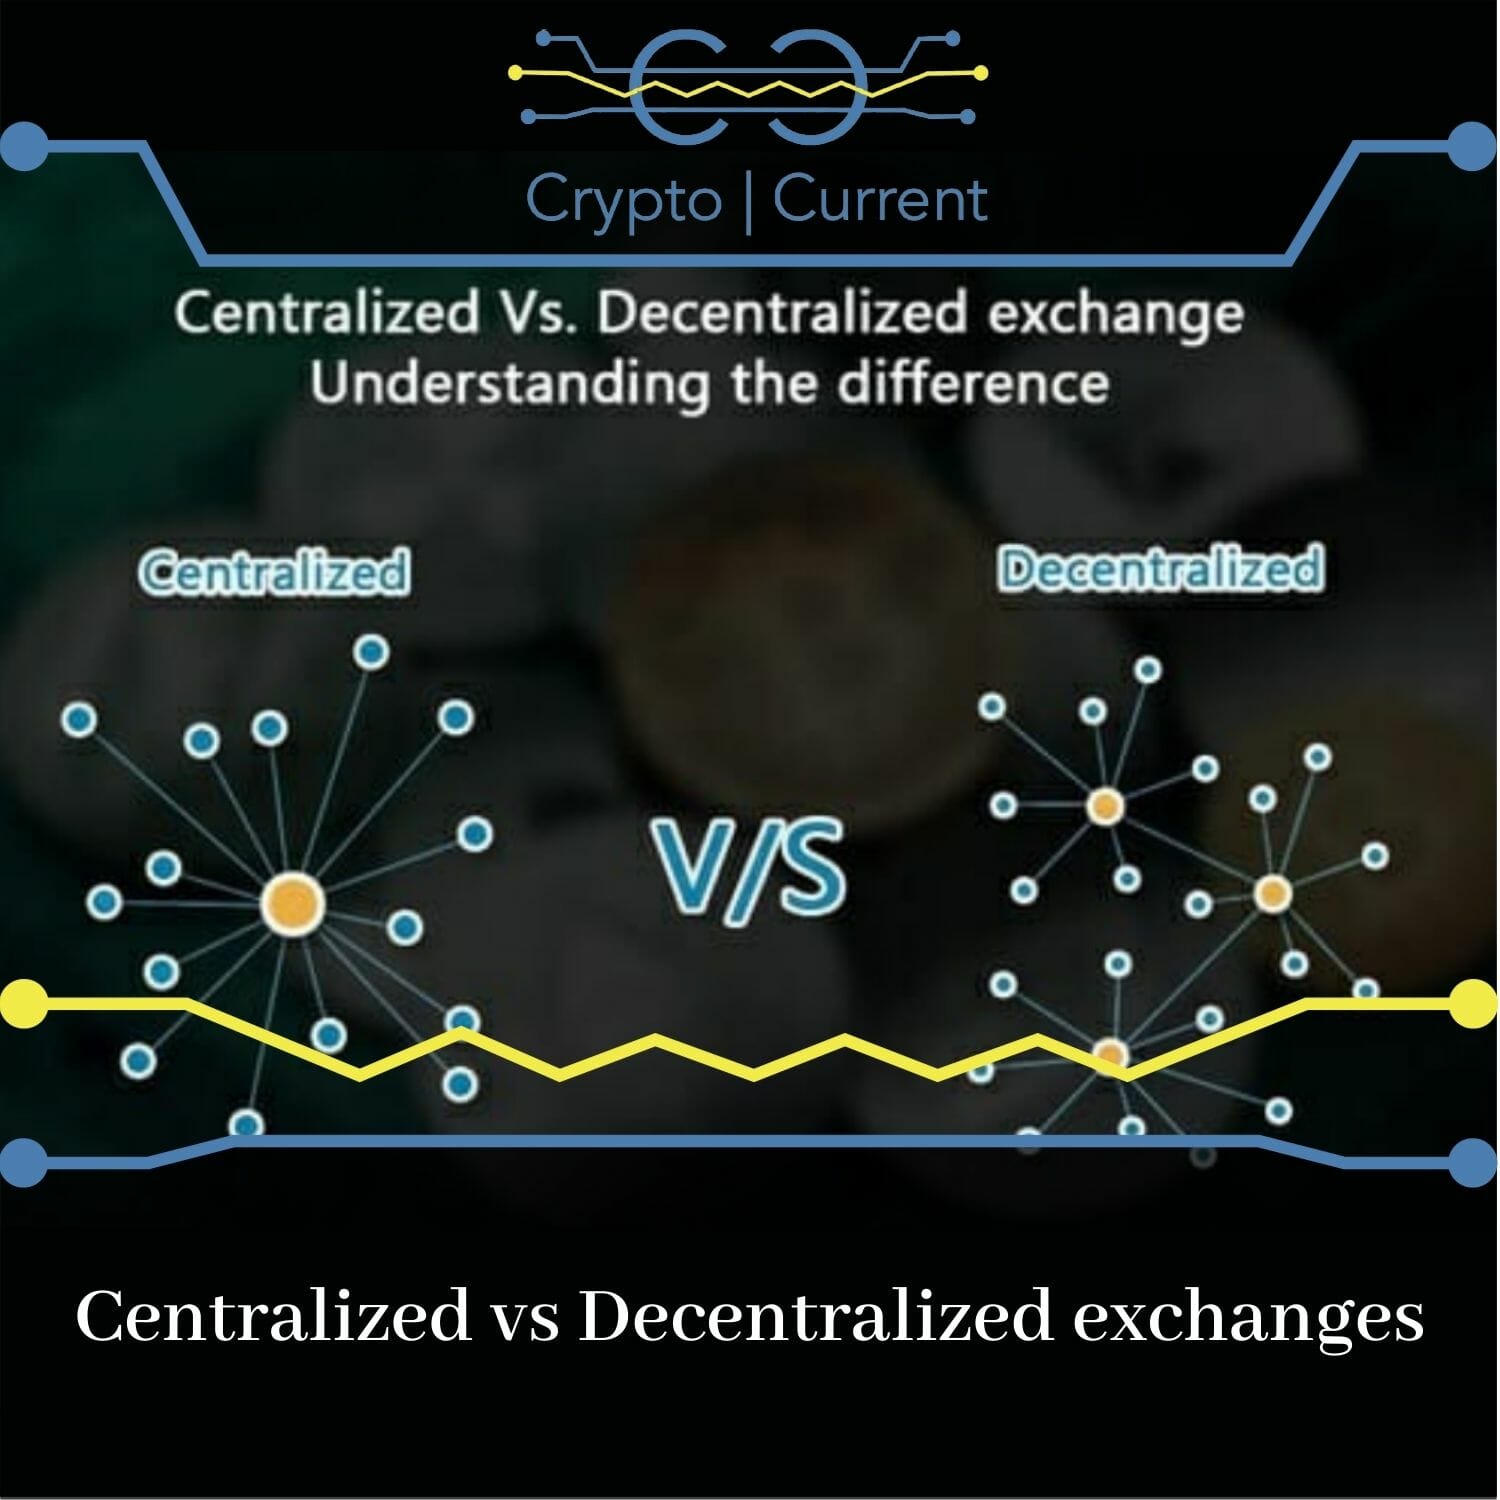 Centralized vs Decentralized exchanges - Crypto Current